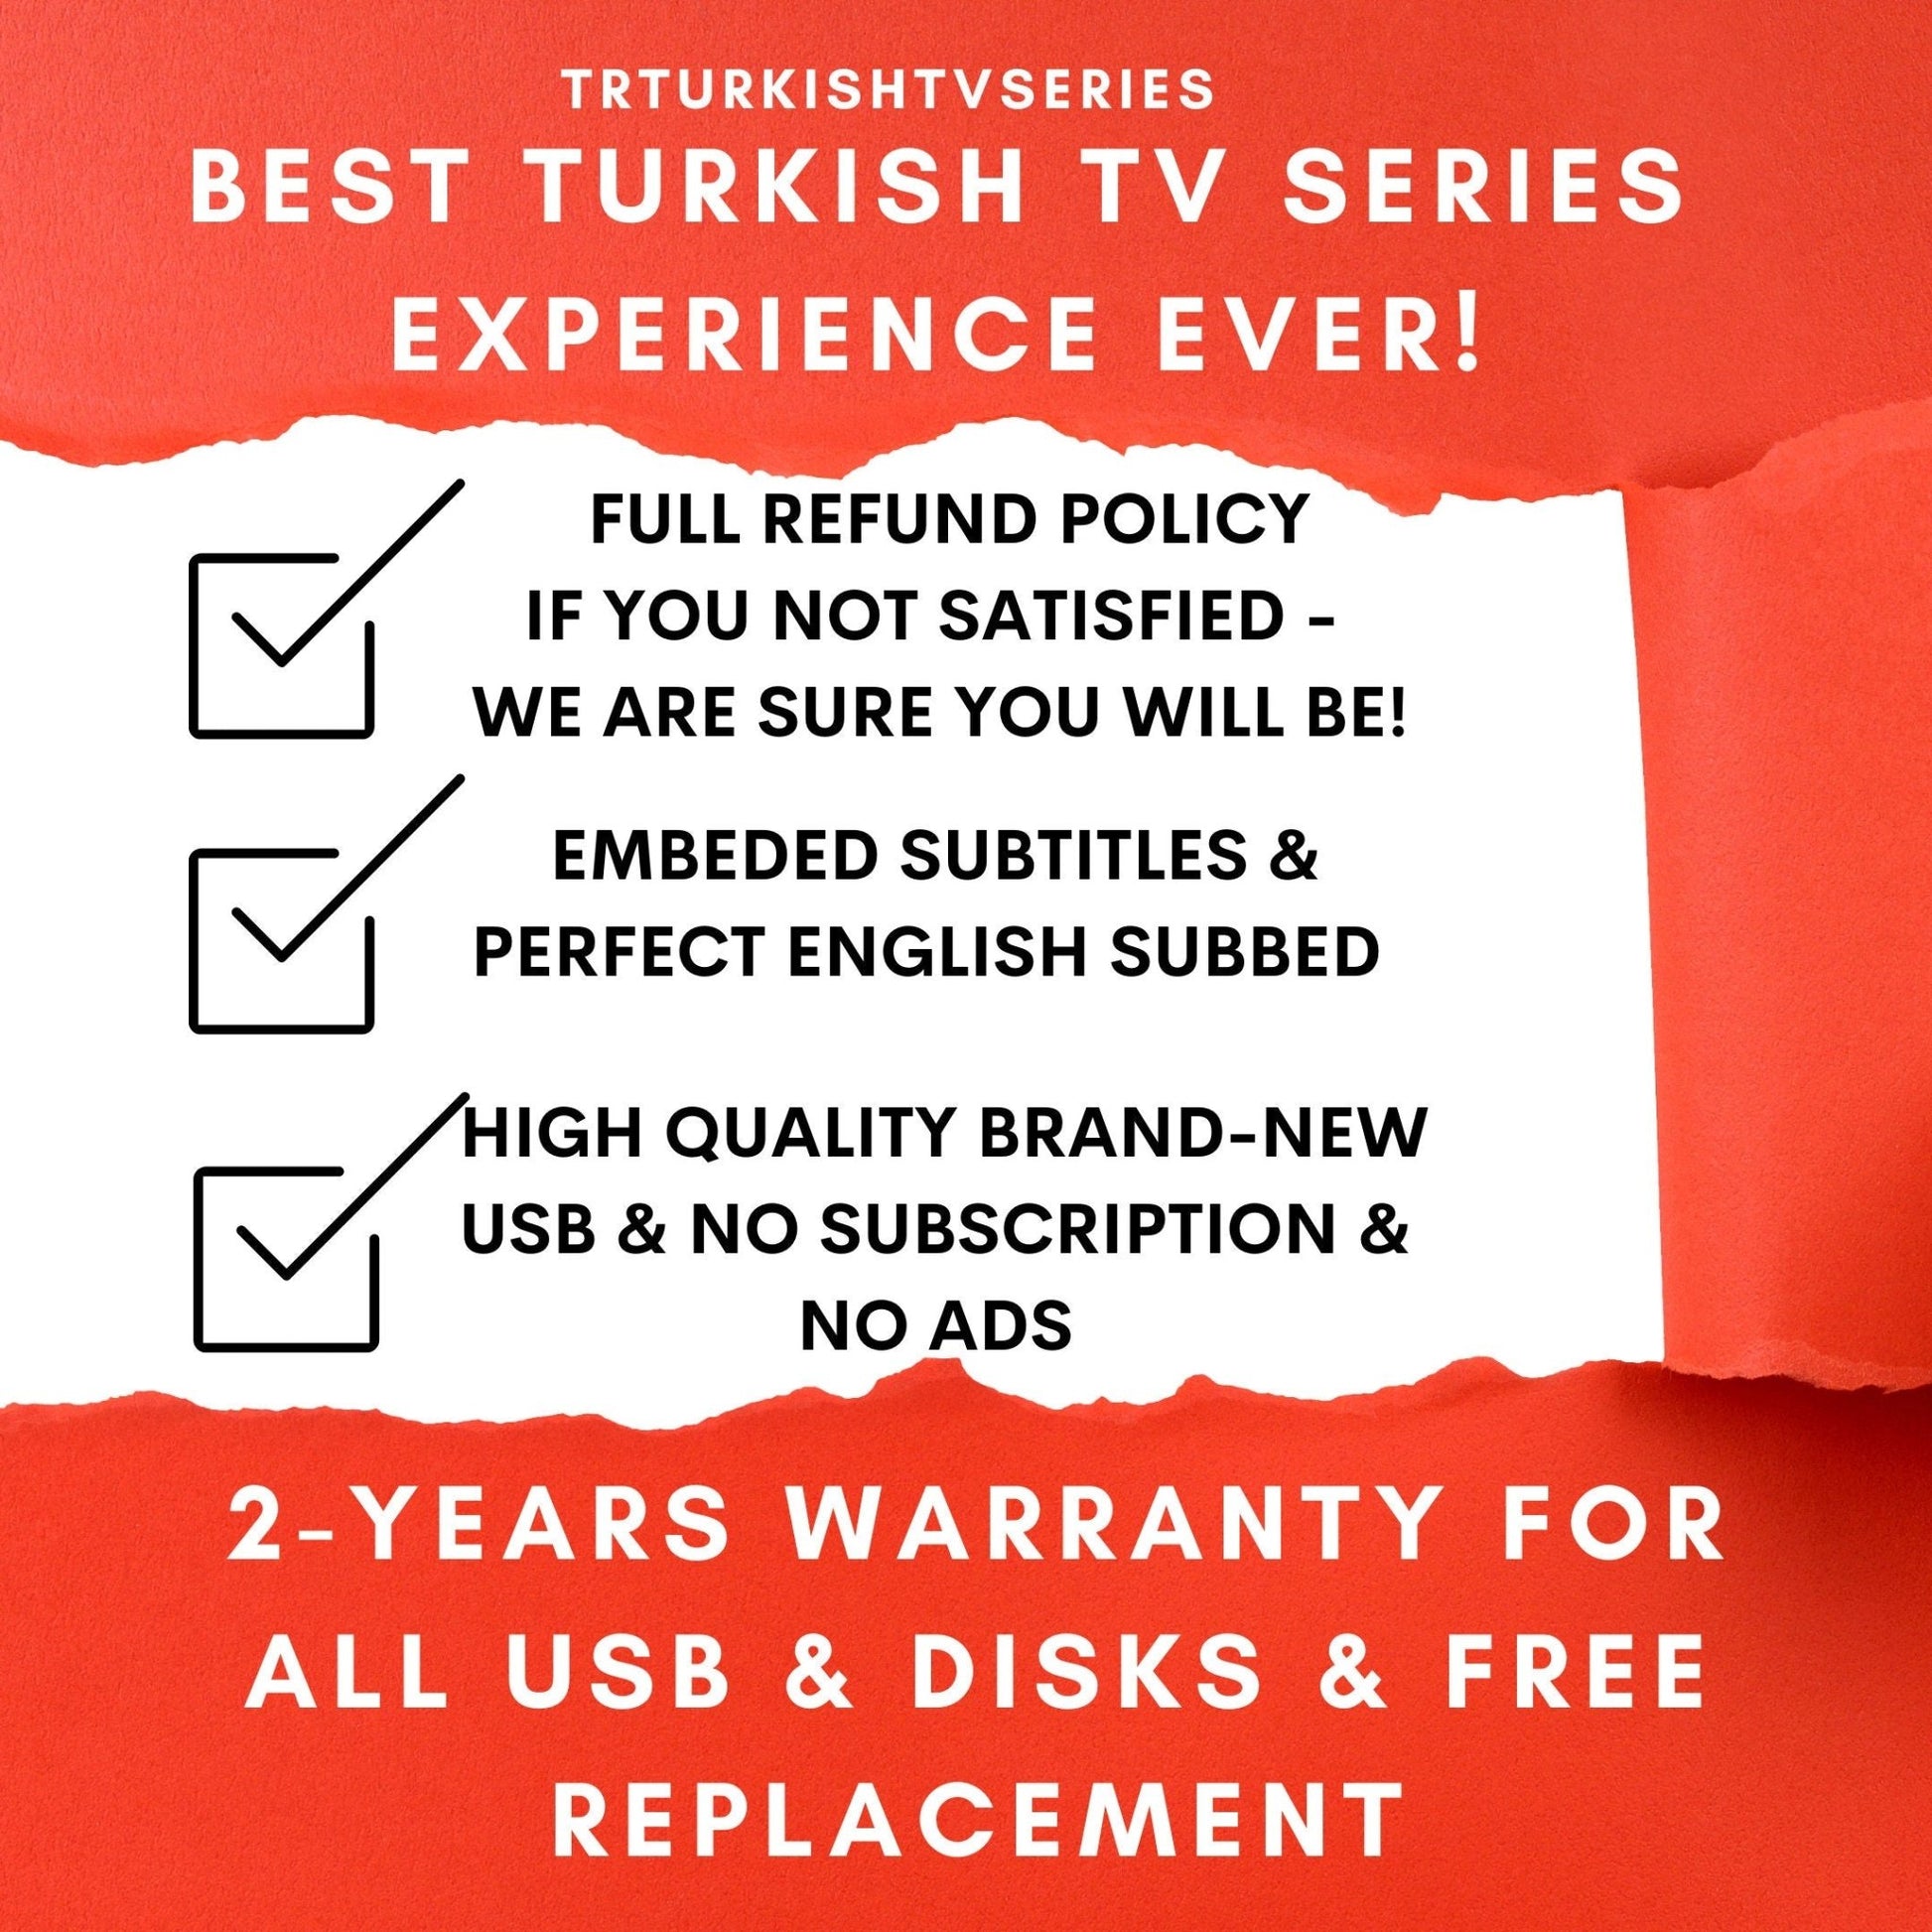 Bride of Istanbul Complete Series | All 87 Episodes in Full 1080HD with Perfect English Subtitles | 'Istanbullu Gelin' on USB Memory Sticks | All Season Turkish True Story - Turkish TV Series